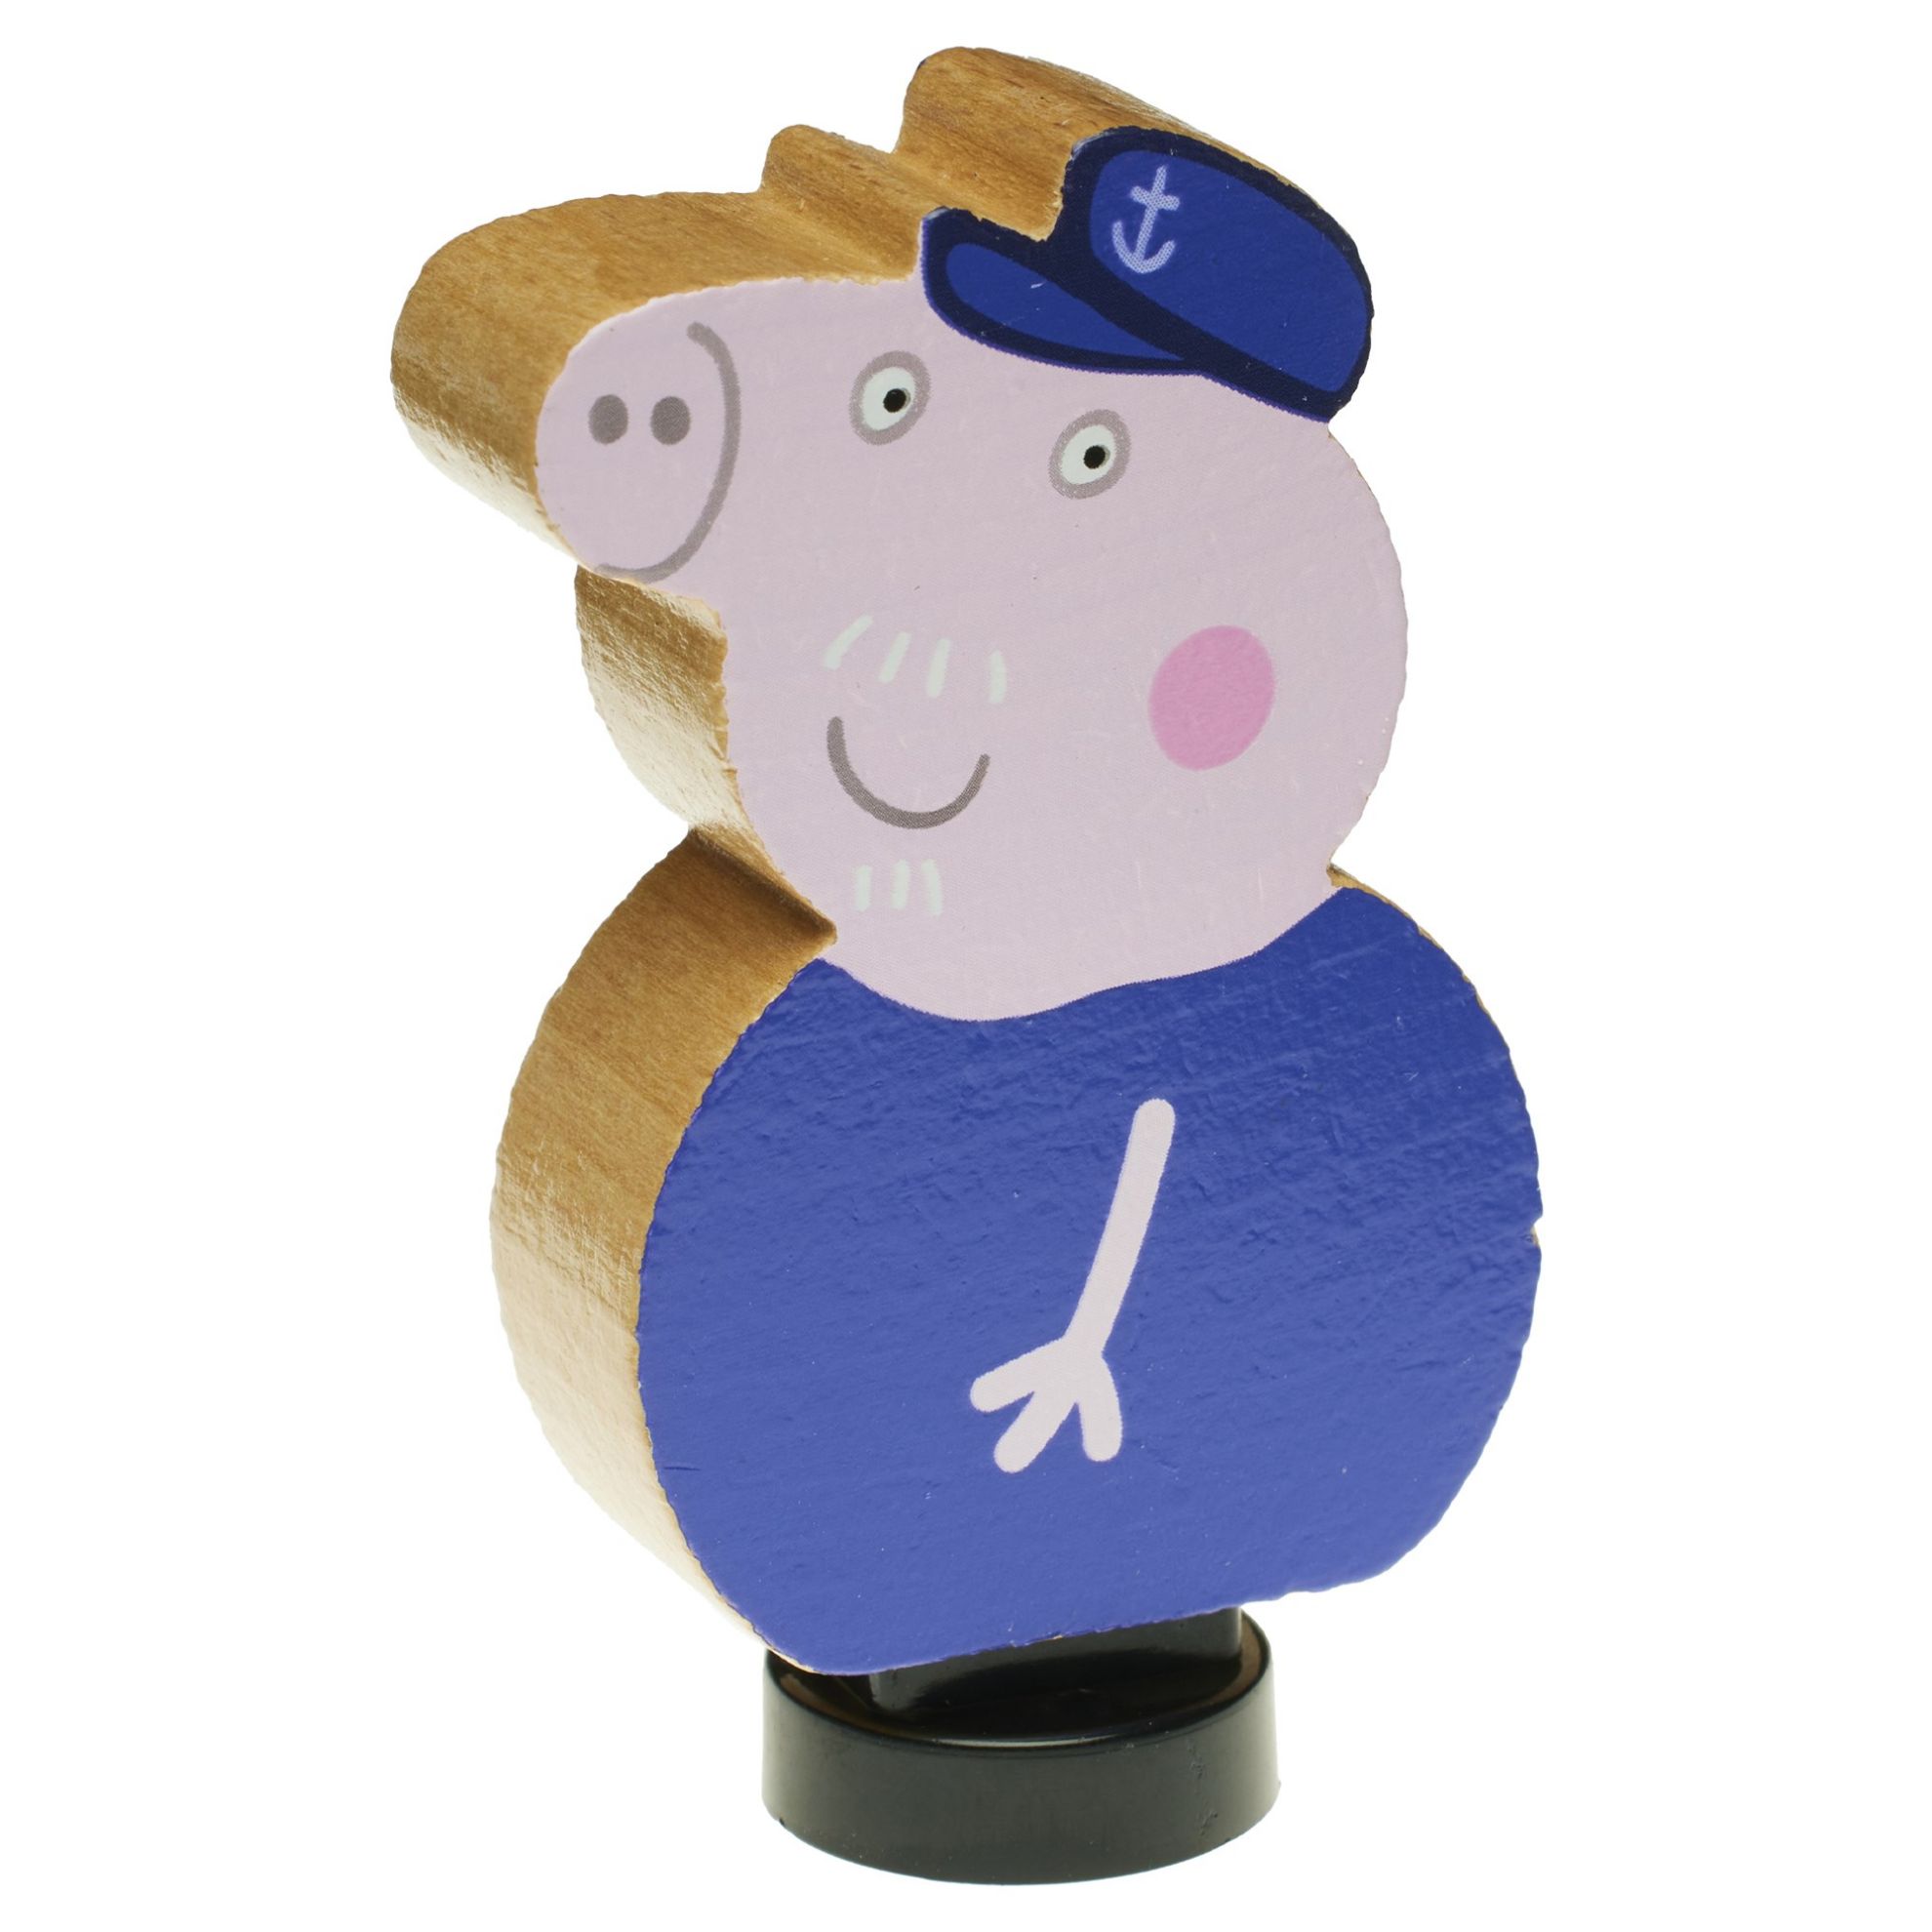 Spare Parts - Peppa Pig's Wooden Family Home - Wooden Grandpa Figure 